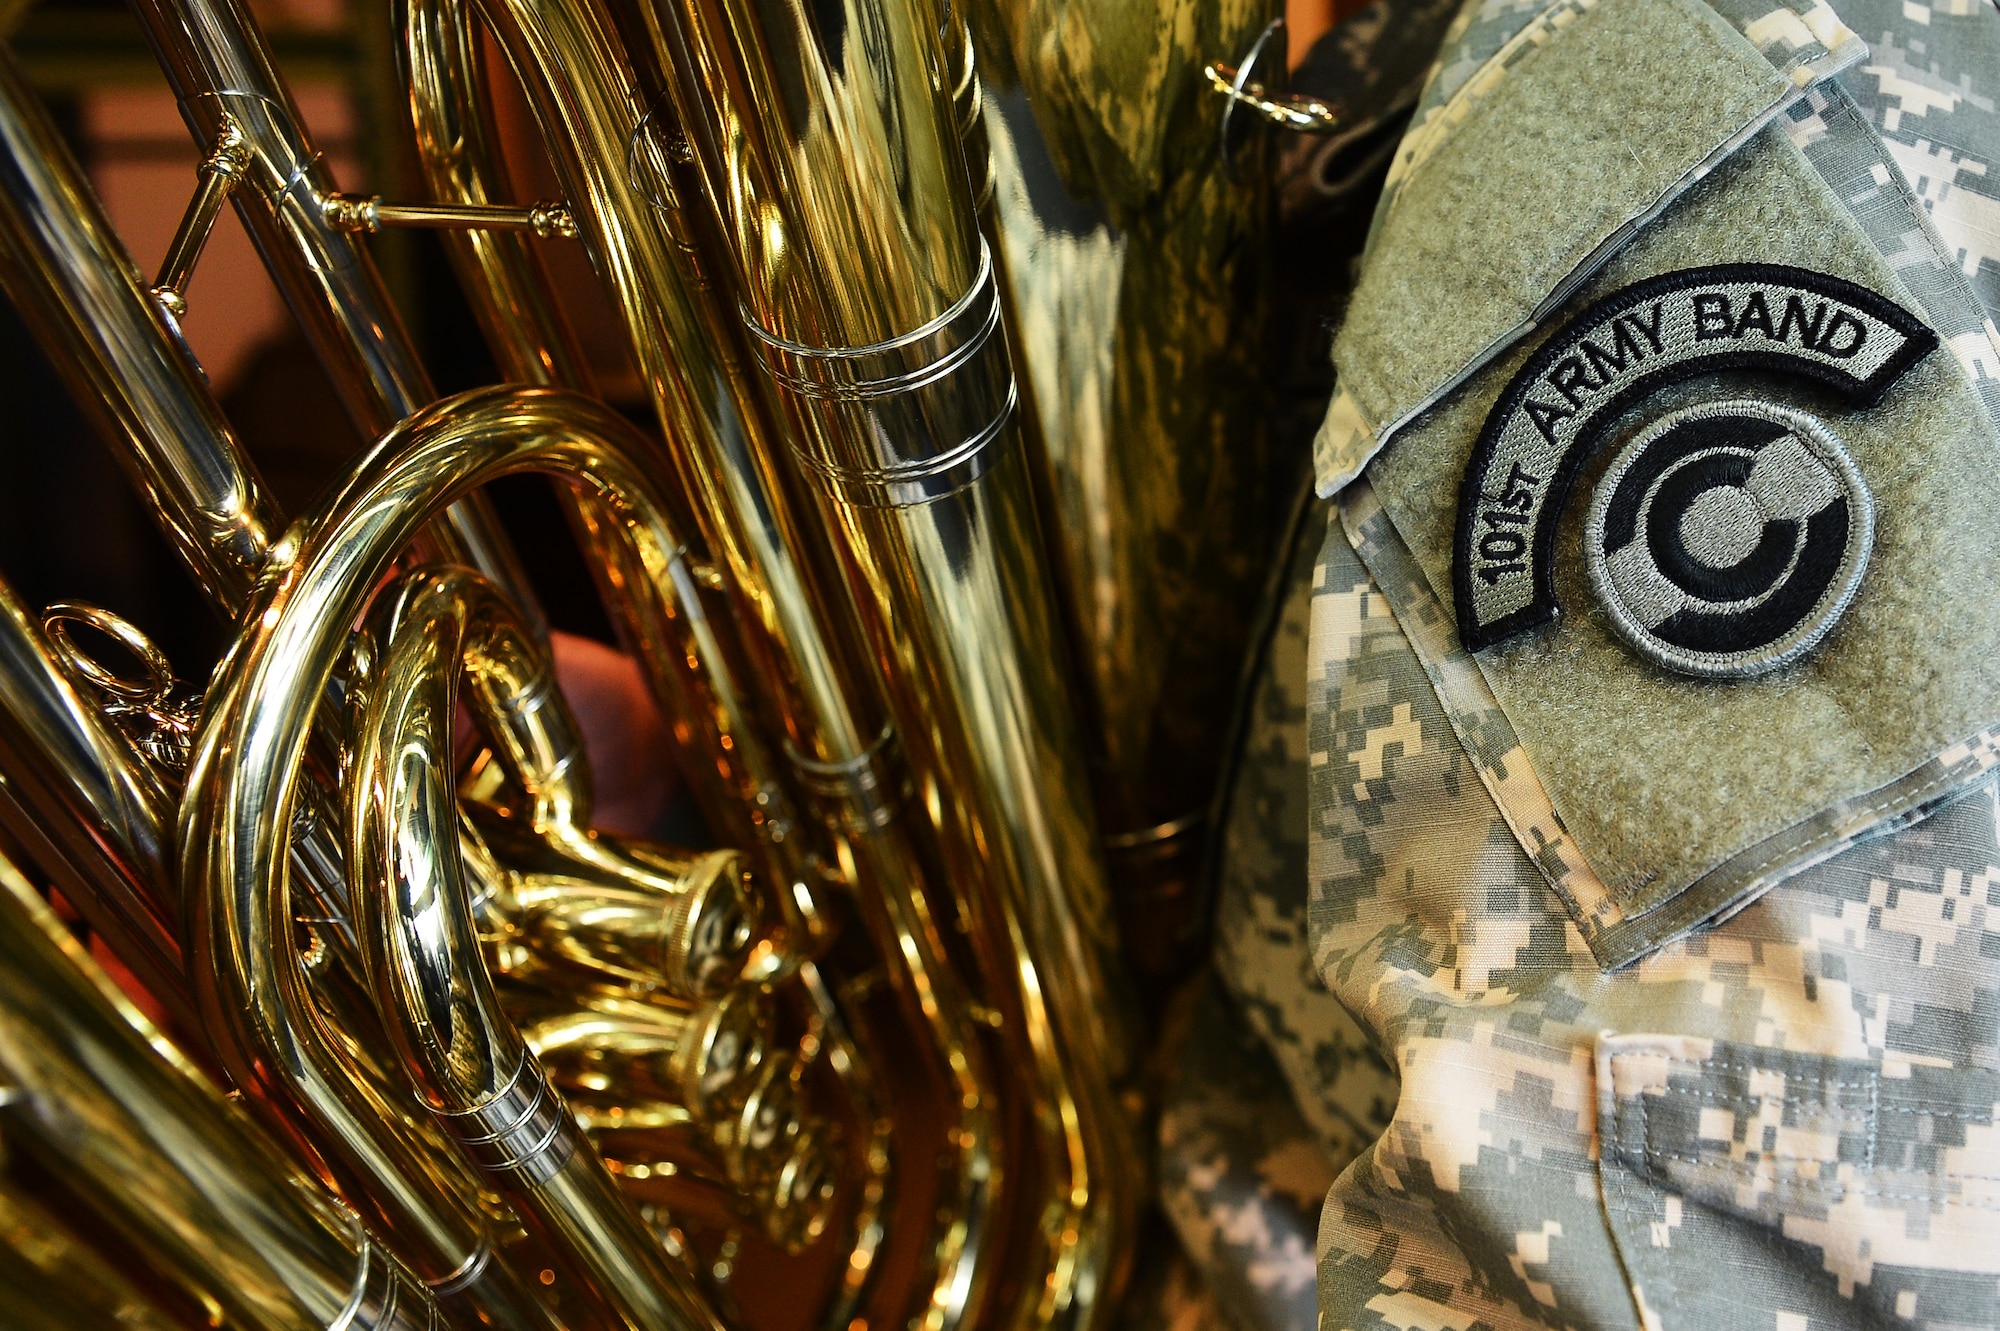 U.S. Army Staff Sgt. Nicolas Harris, Colorado Army National Guard 101st Army Band readiness NCO, plays the tuba Feb. 27, 2014, at the Joint Army Air Building on Buckley Air Force Base, Colo. For the past 77 years, the COANG 101st Army Band has been serving the state’s military and civilian community through the tradition of musical performance.